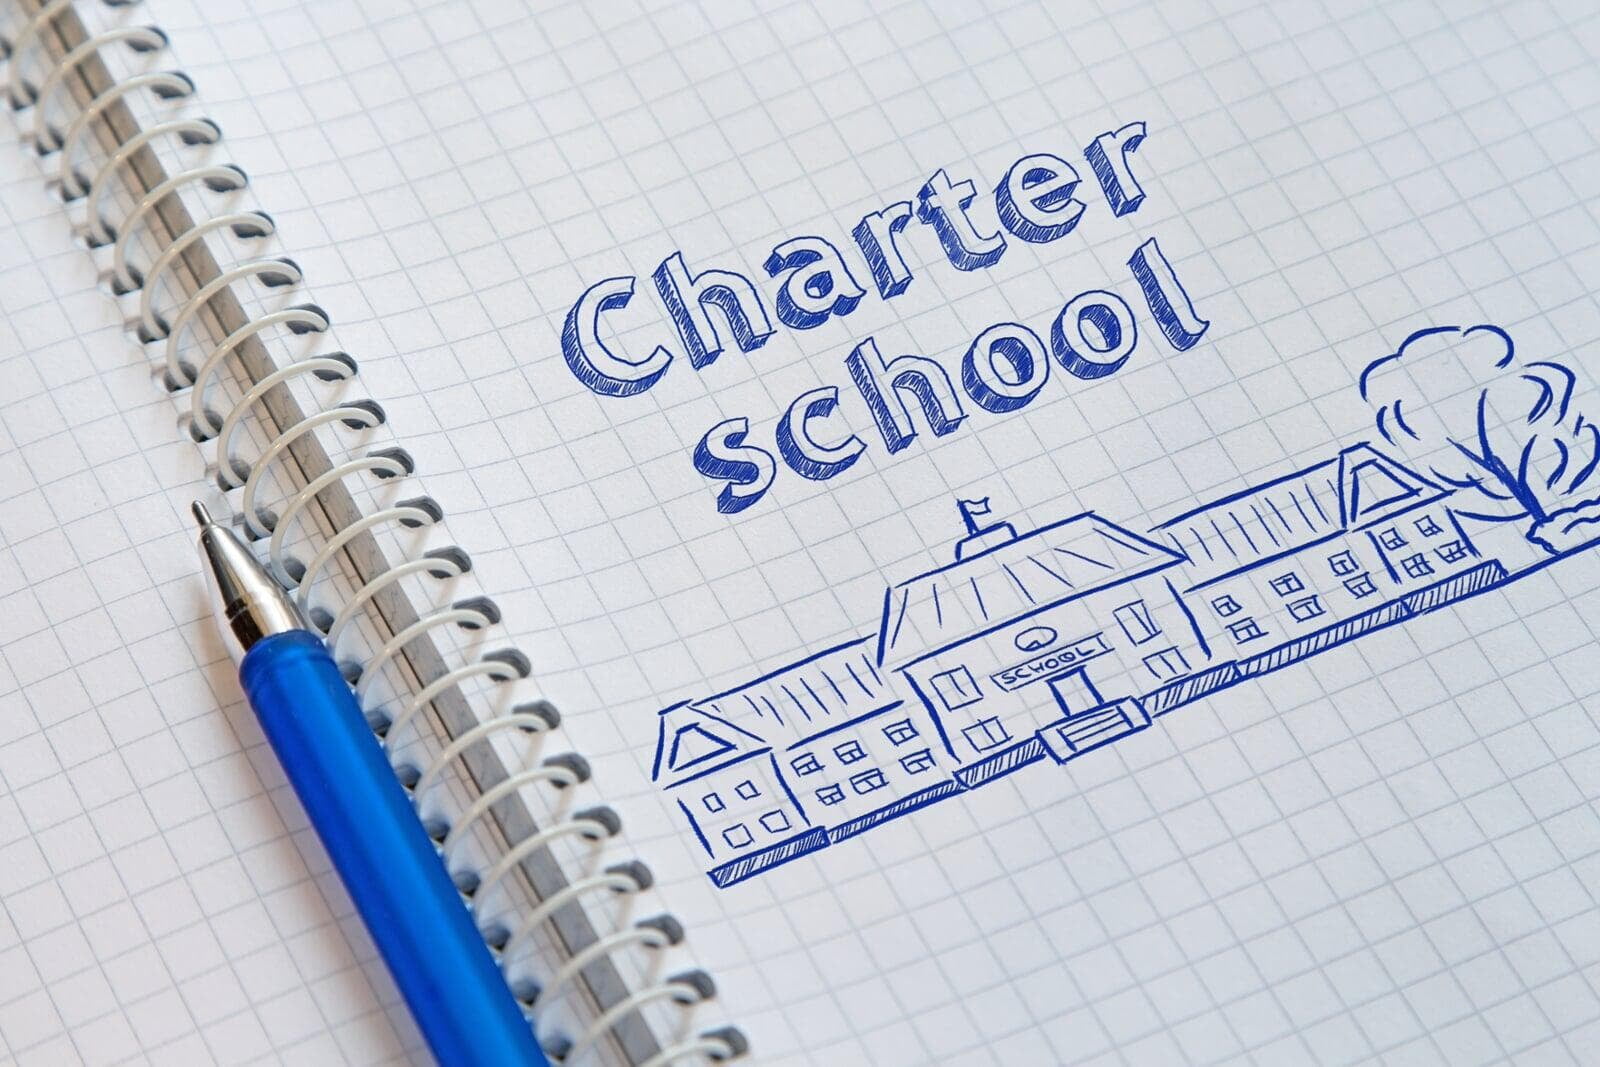 Board of Ed Asks For More Rules For State-Funded Charter Schools 